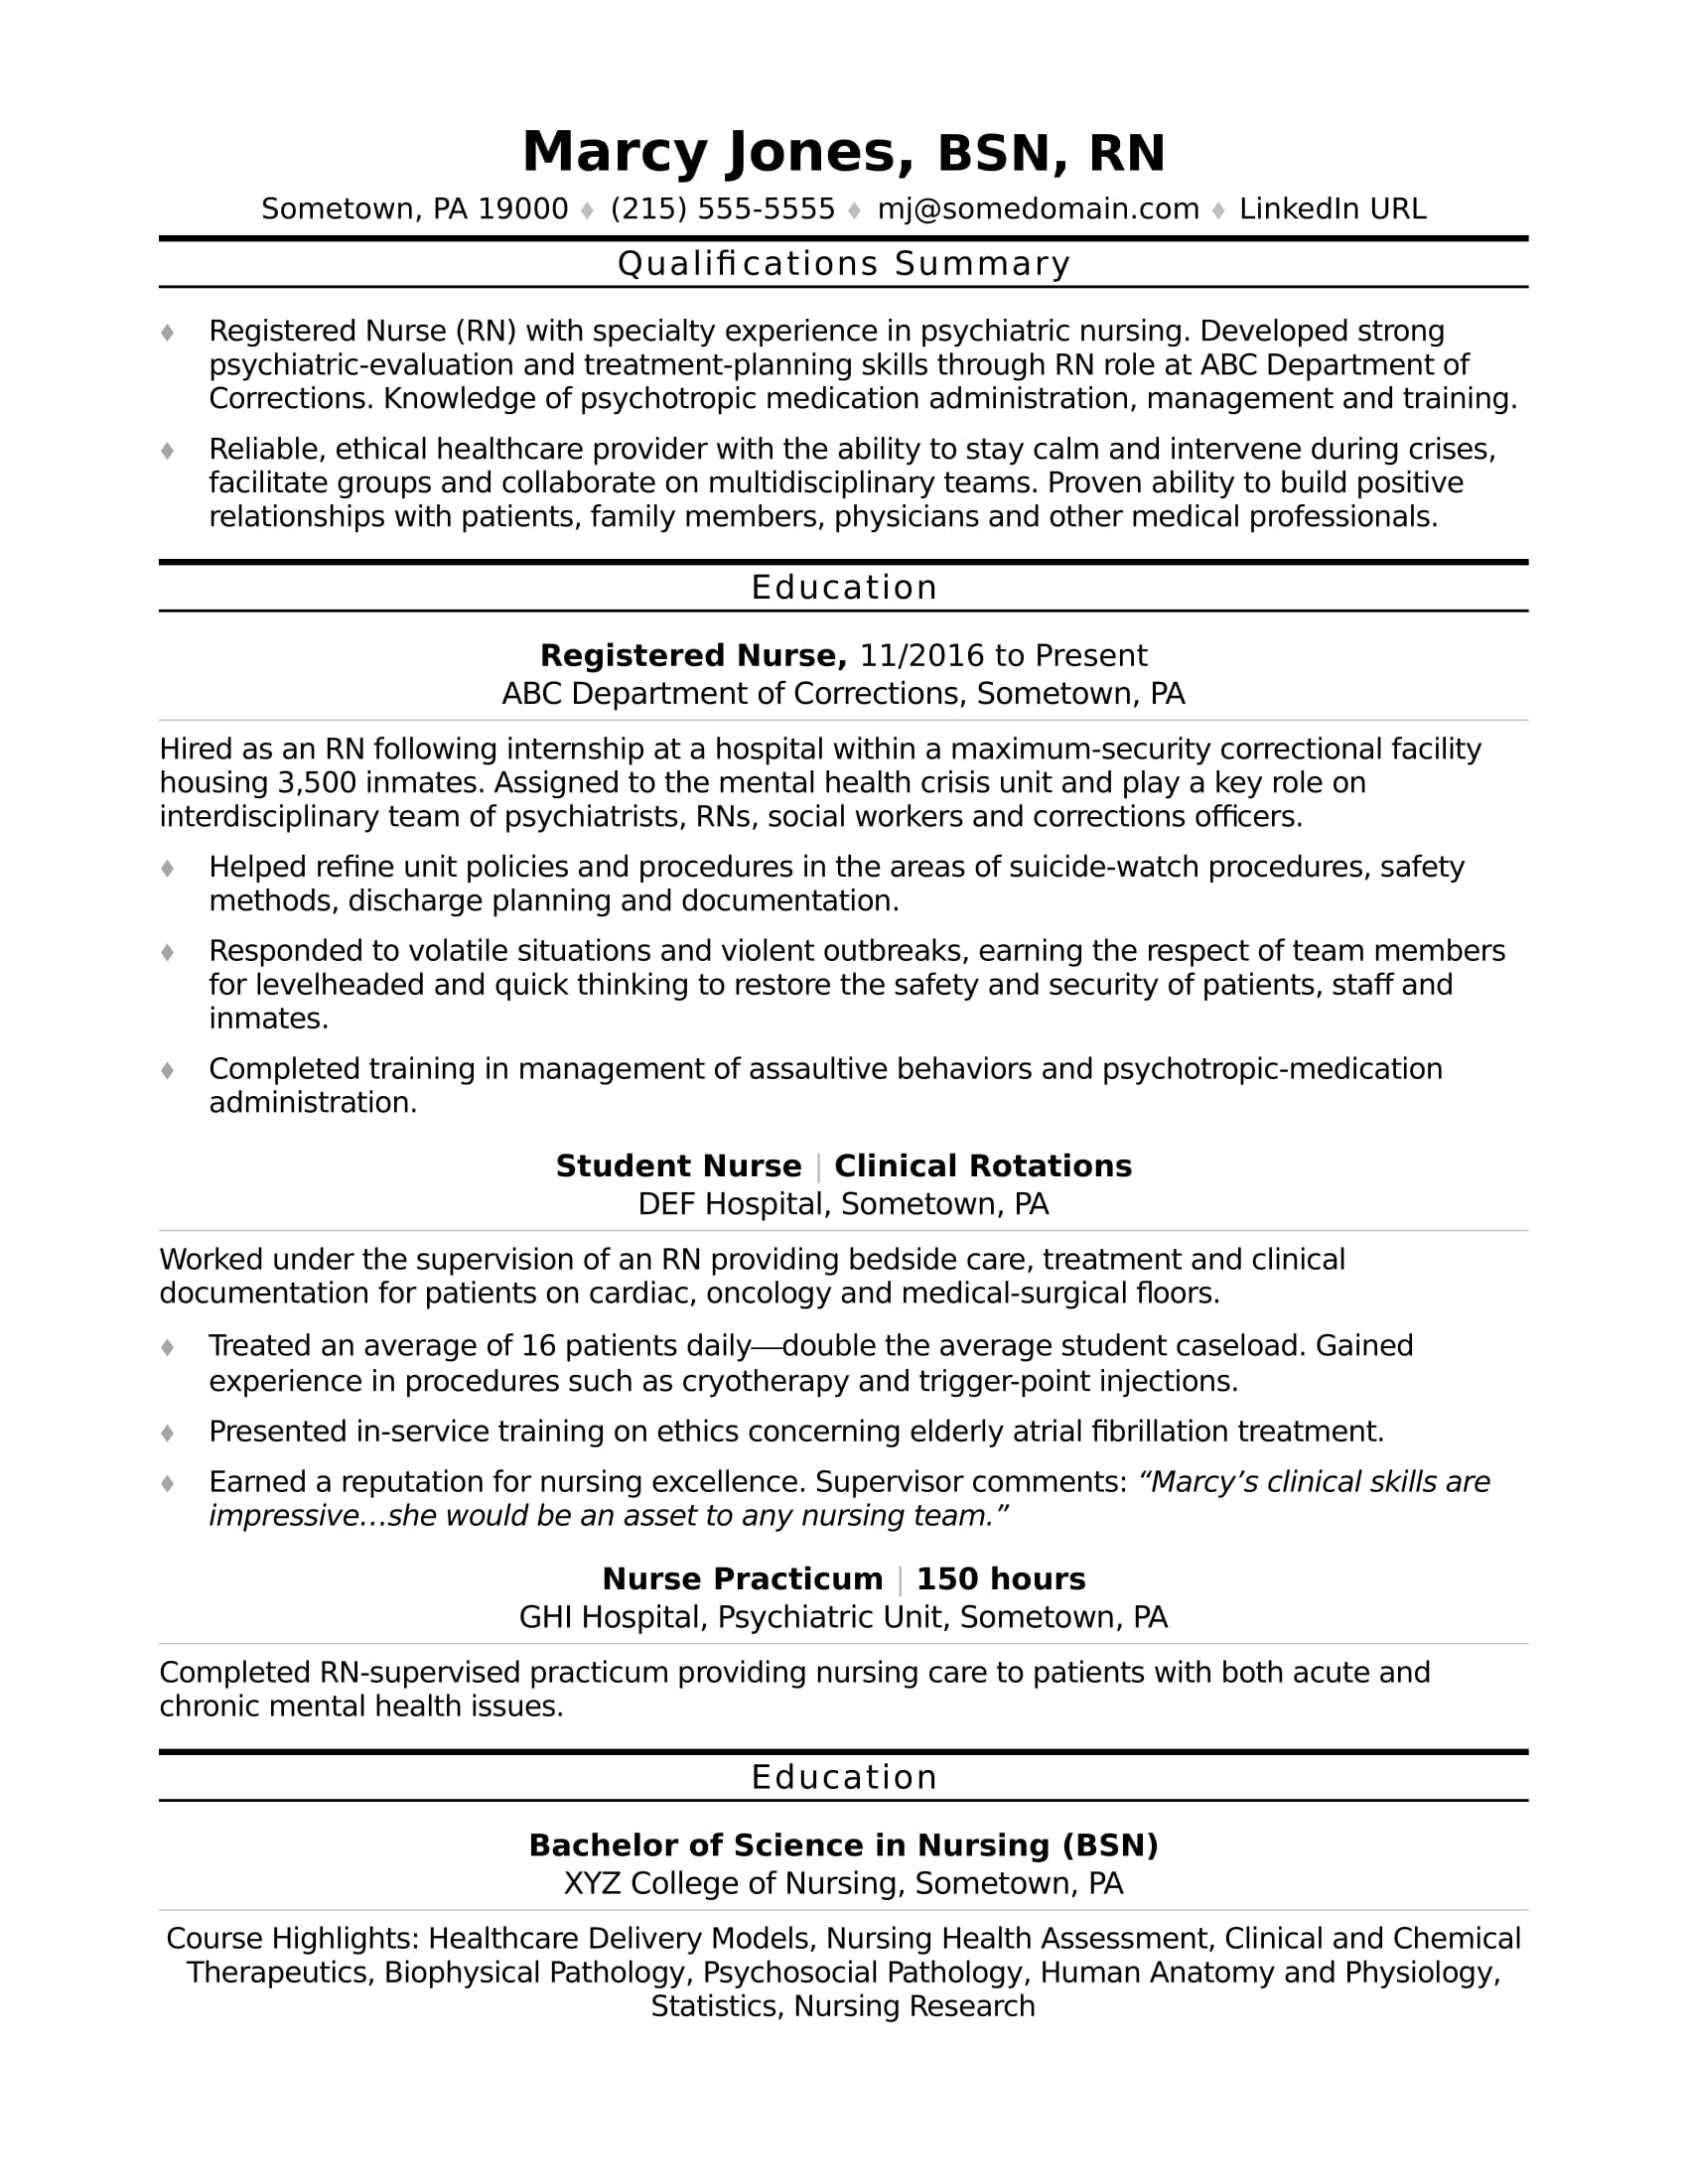 Rn Resume Examples Entry Level Rn rn resume examples|wikiresume.com